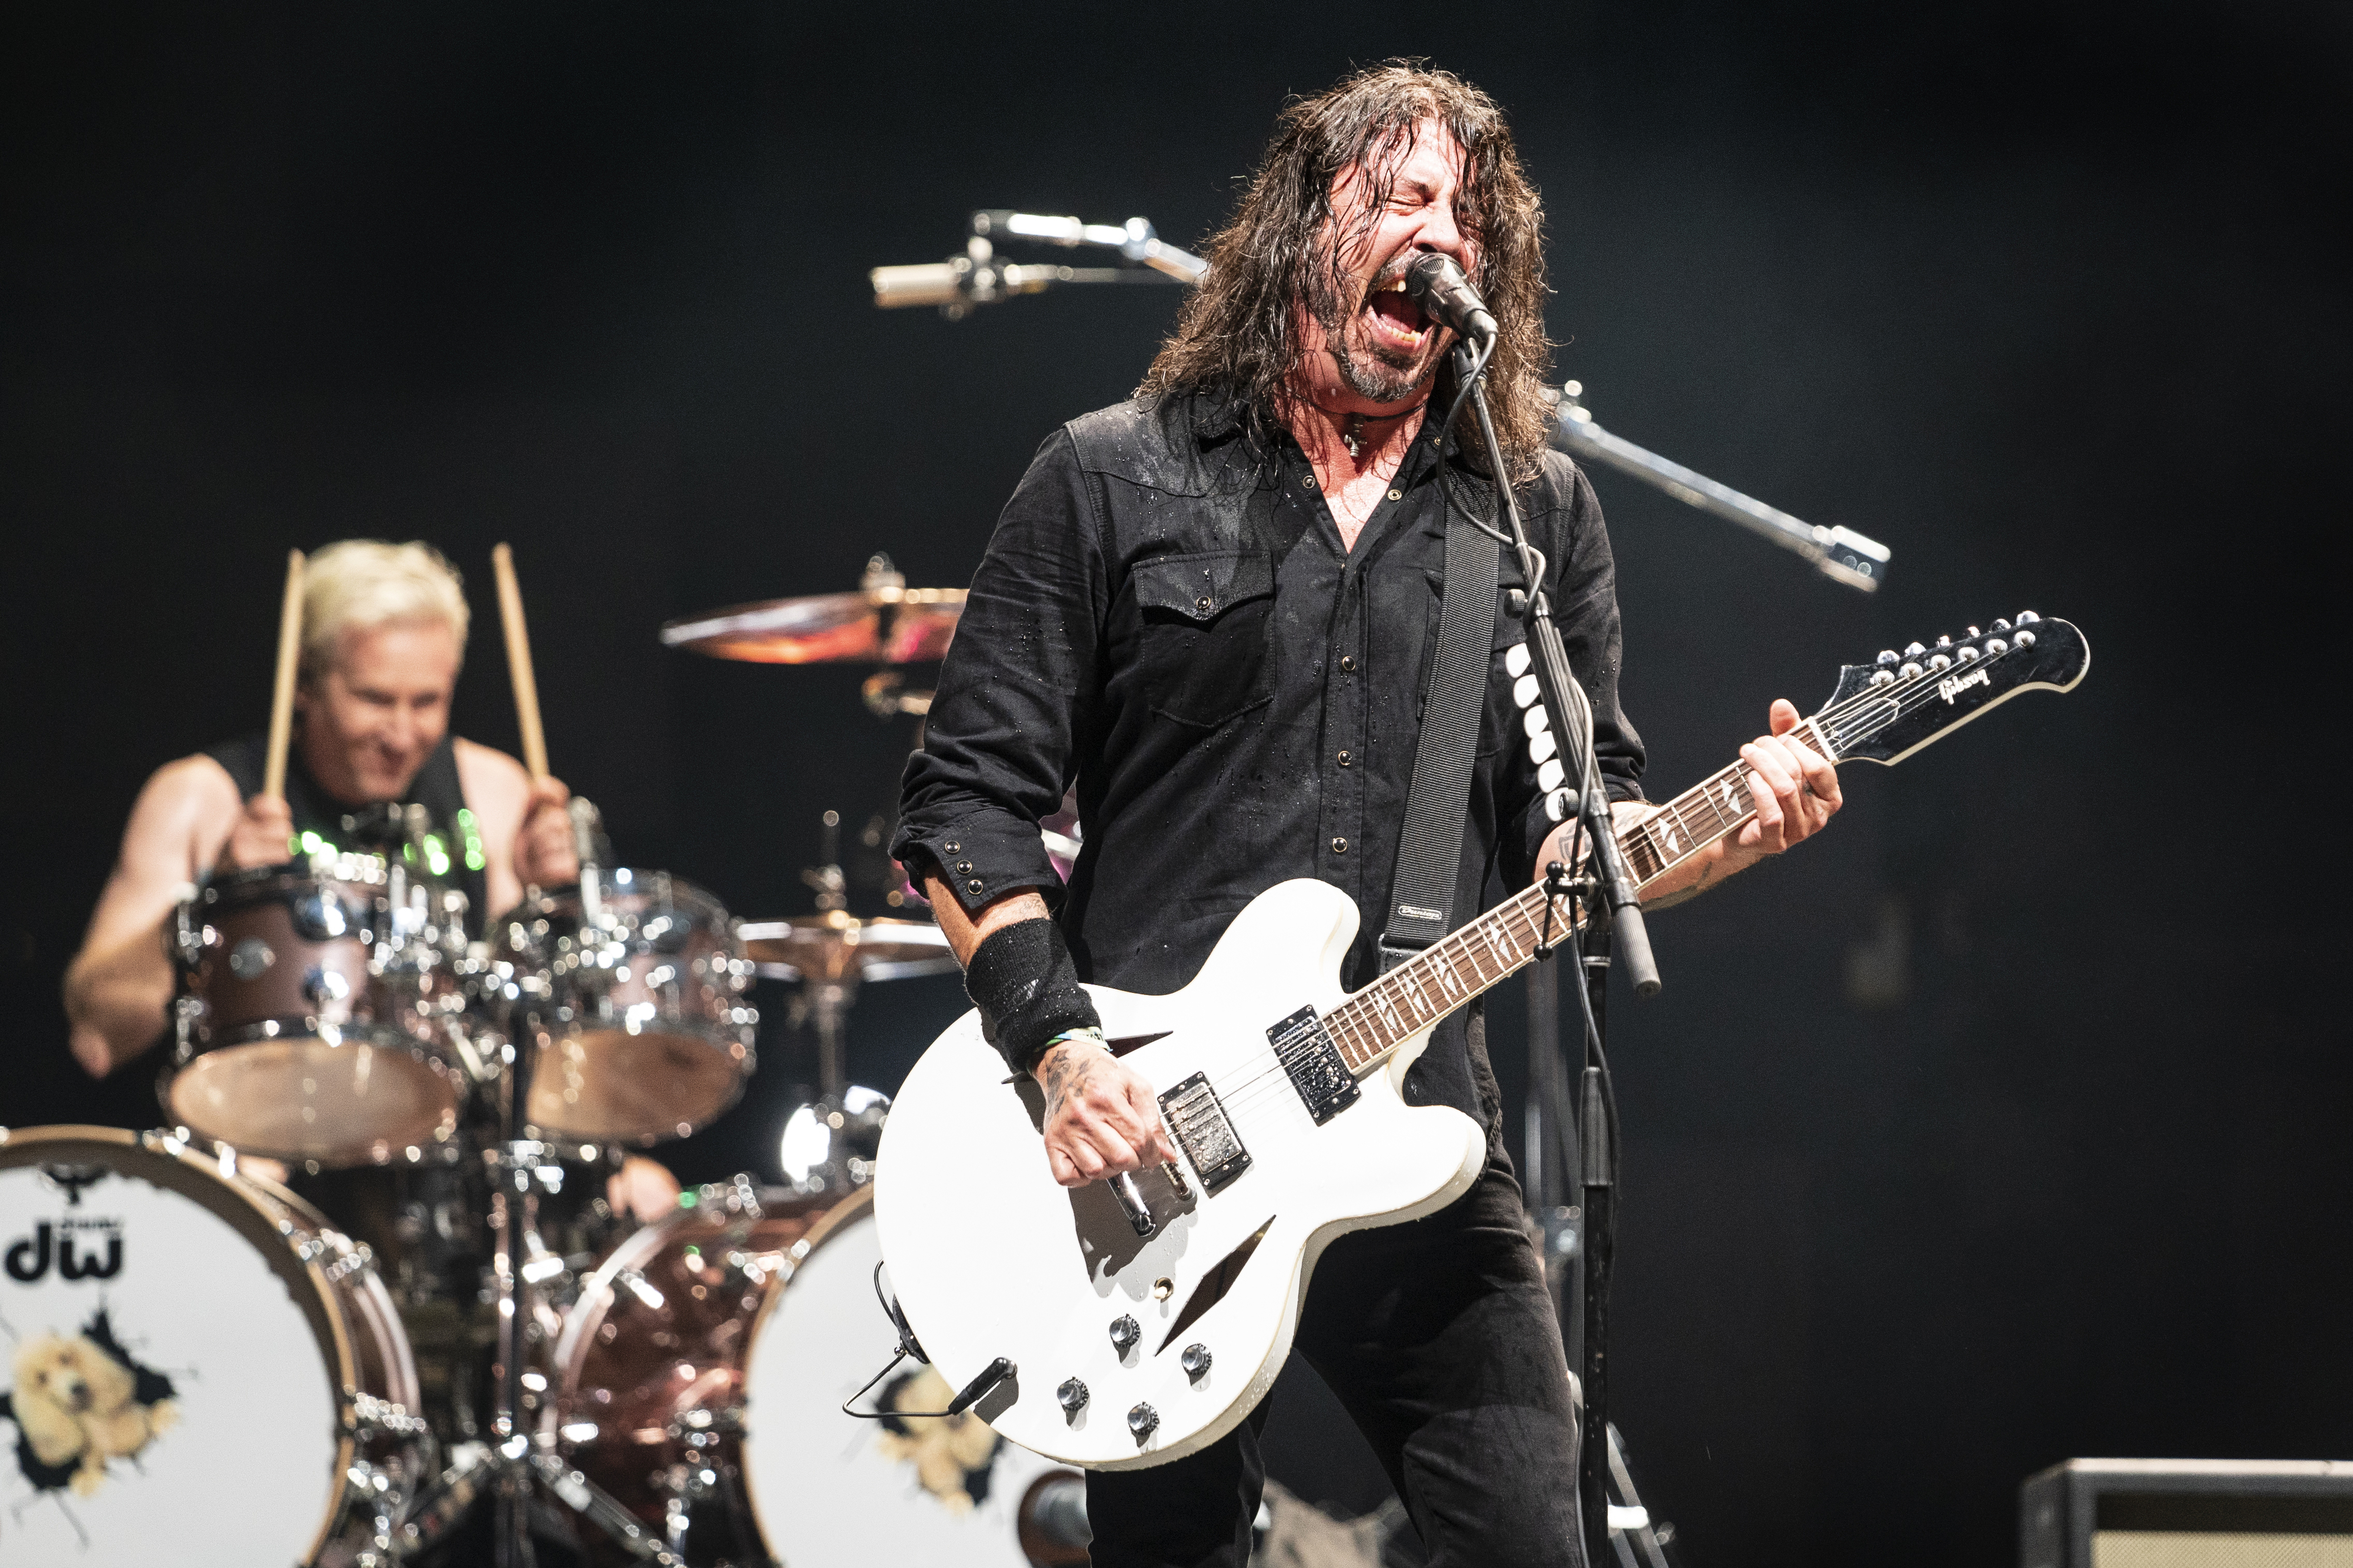 Dave Grohl passionately plays guitar and sings on stage while Taylor Hawkins energetically plays drums in the background